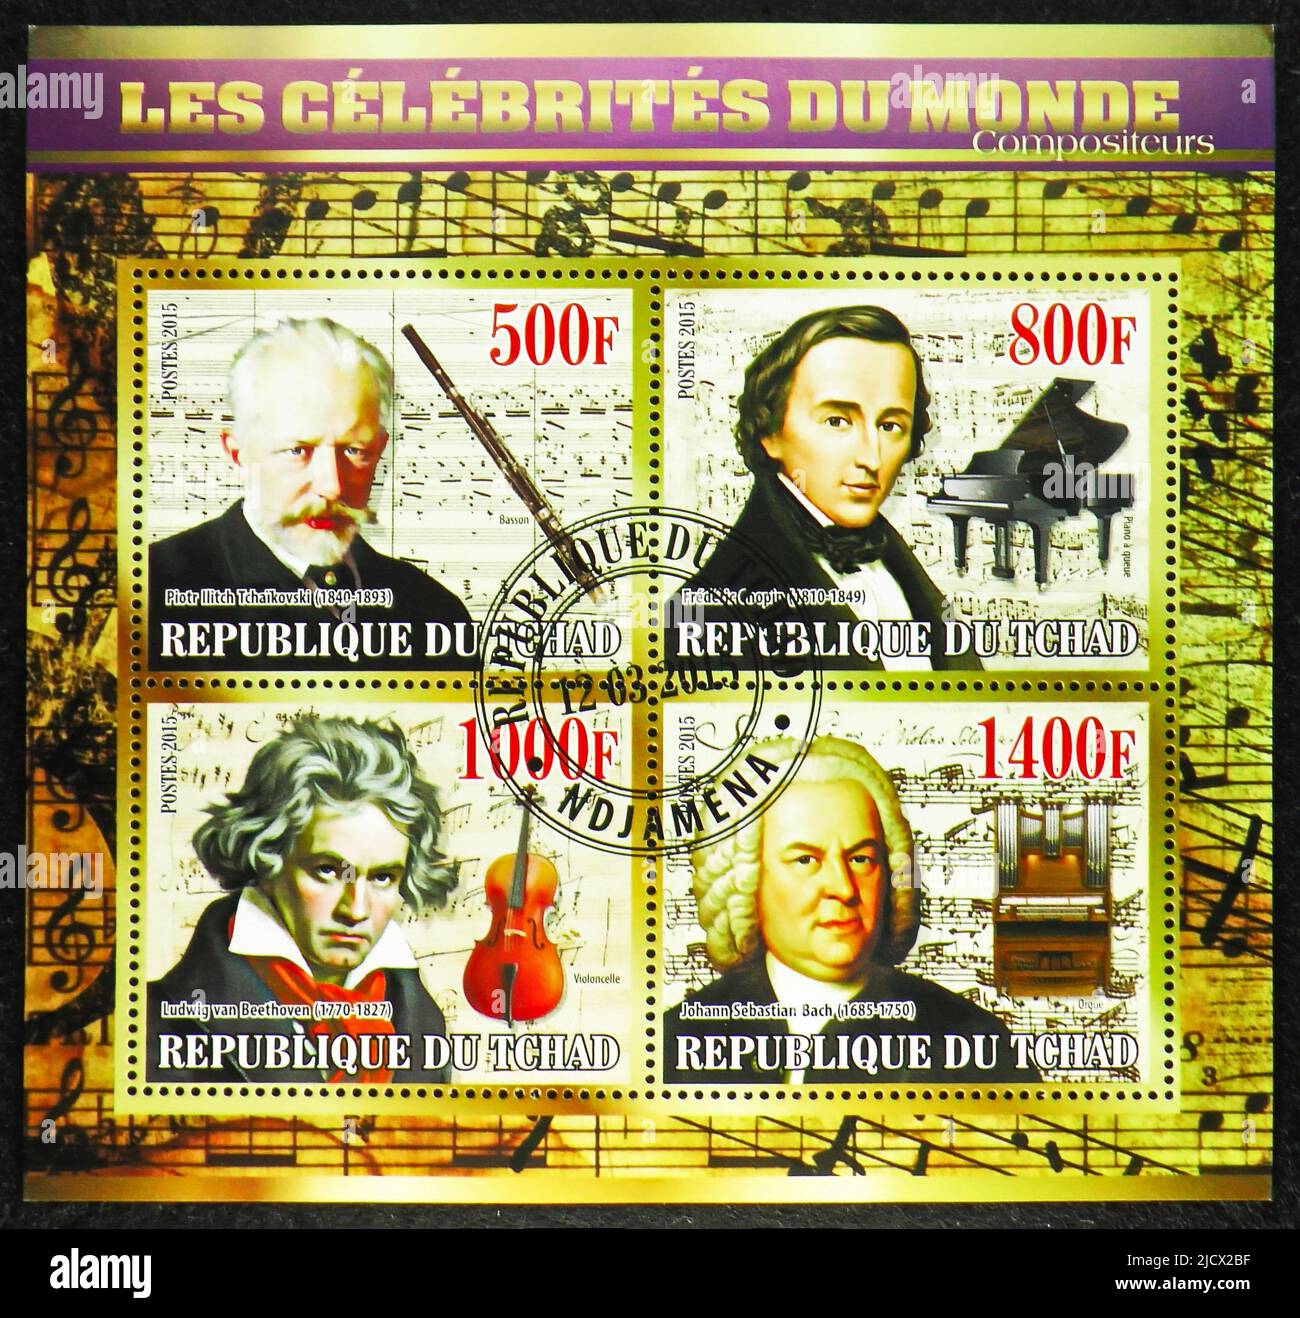 MOSCOW, RUSSIA - JUNE 12, 2022: Postage stamp printed in Chad shows Block: Celebrities of the Year, Tchaikovski, Chopin, Bach, Beethoven, Composers se Stock Photo